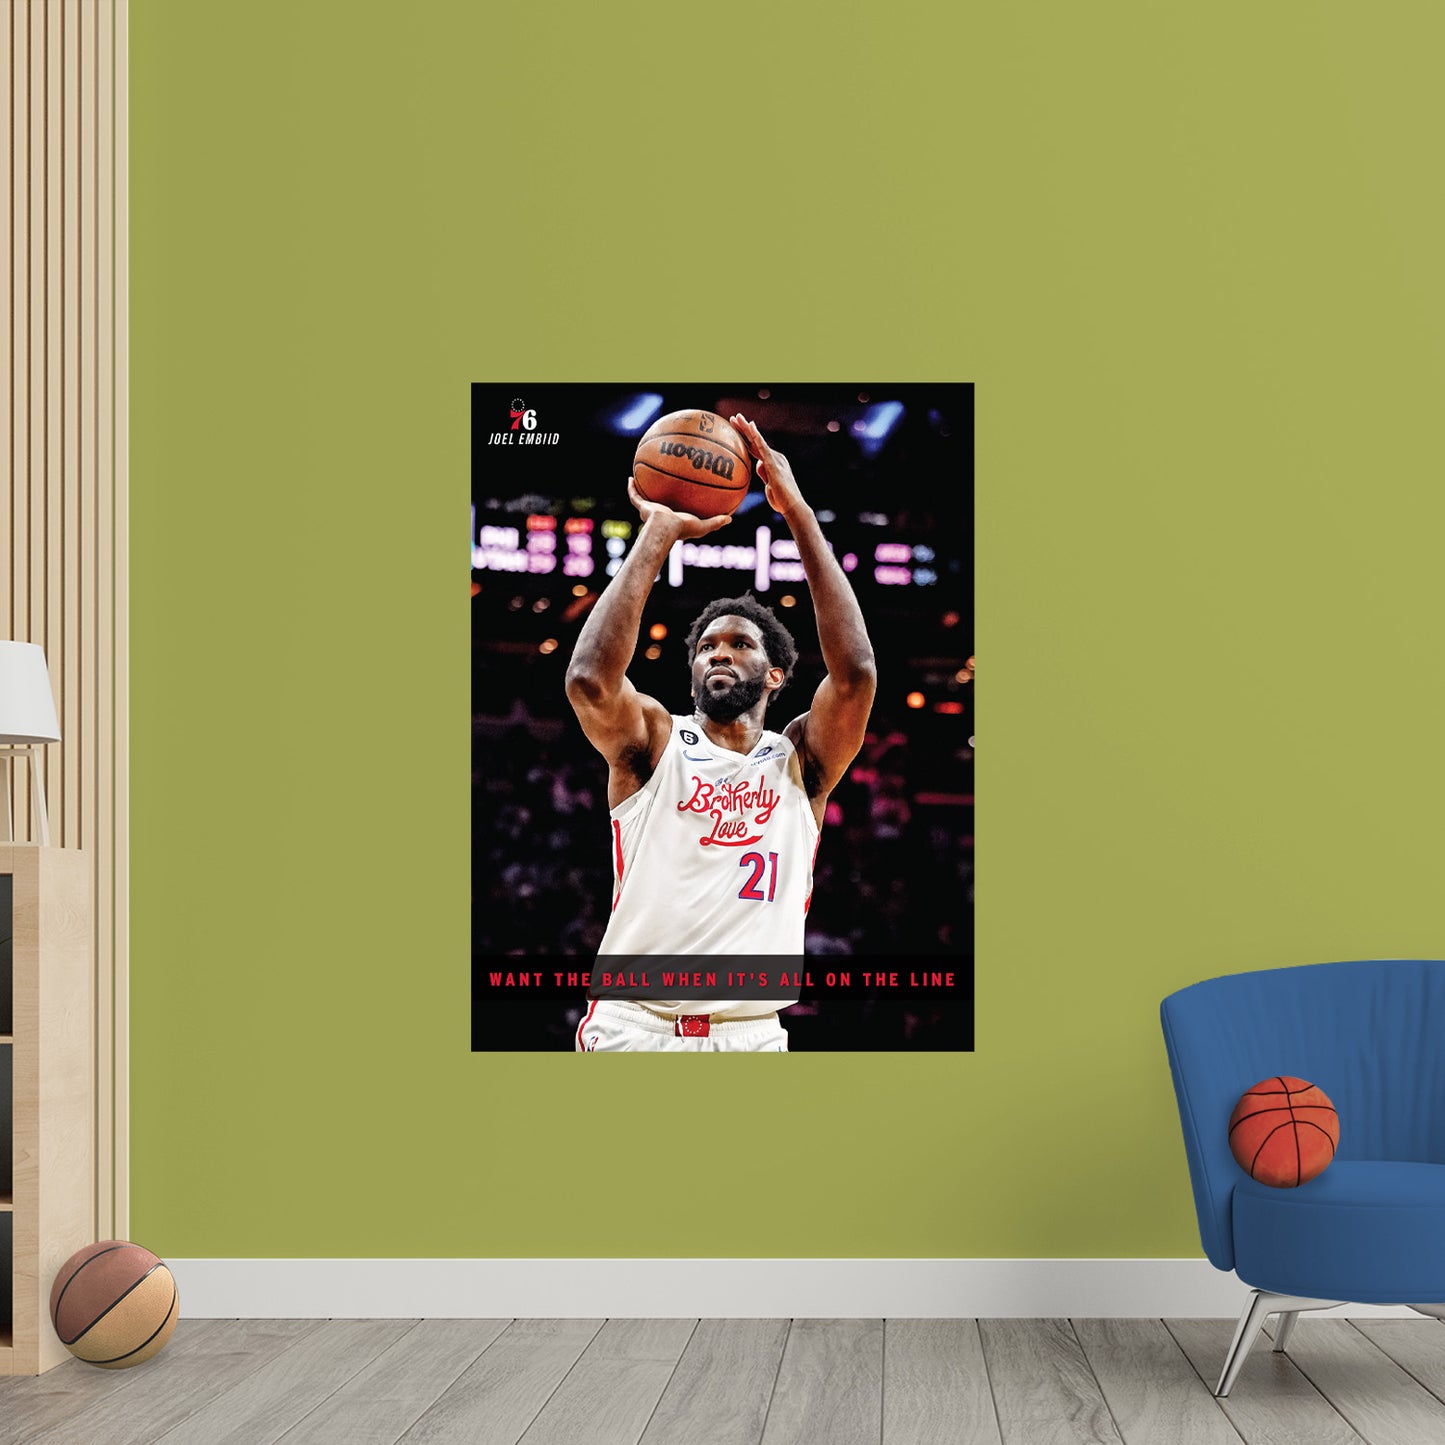 Philadelphia 76ers: Joel Embiid Shooting Motivational Poster - Officially Licensed NBA Removable Adhesive Decal